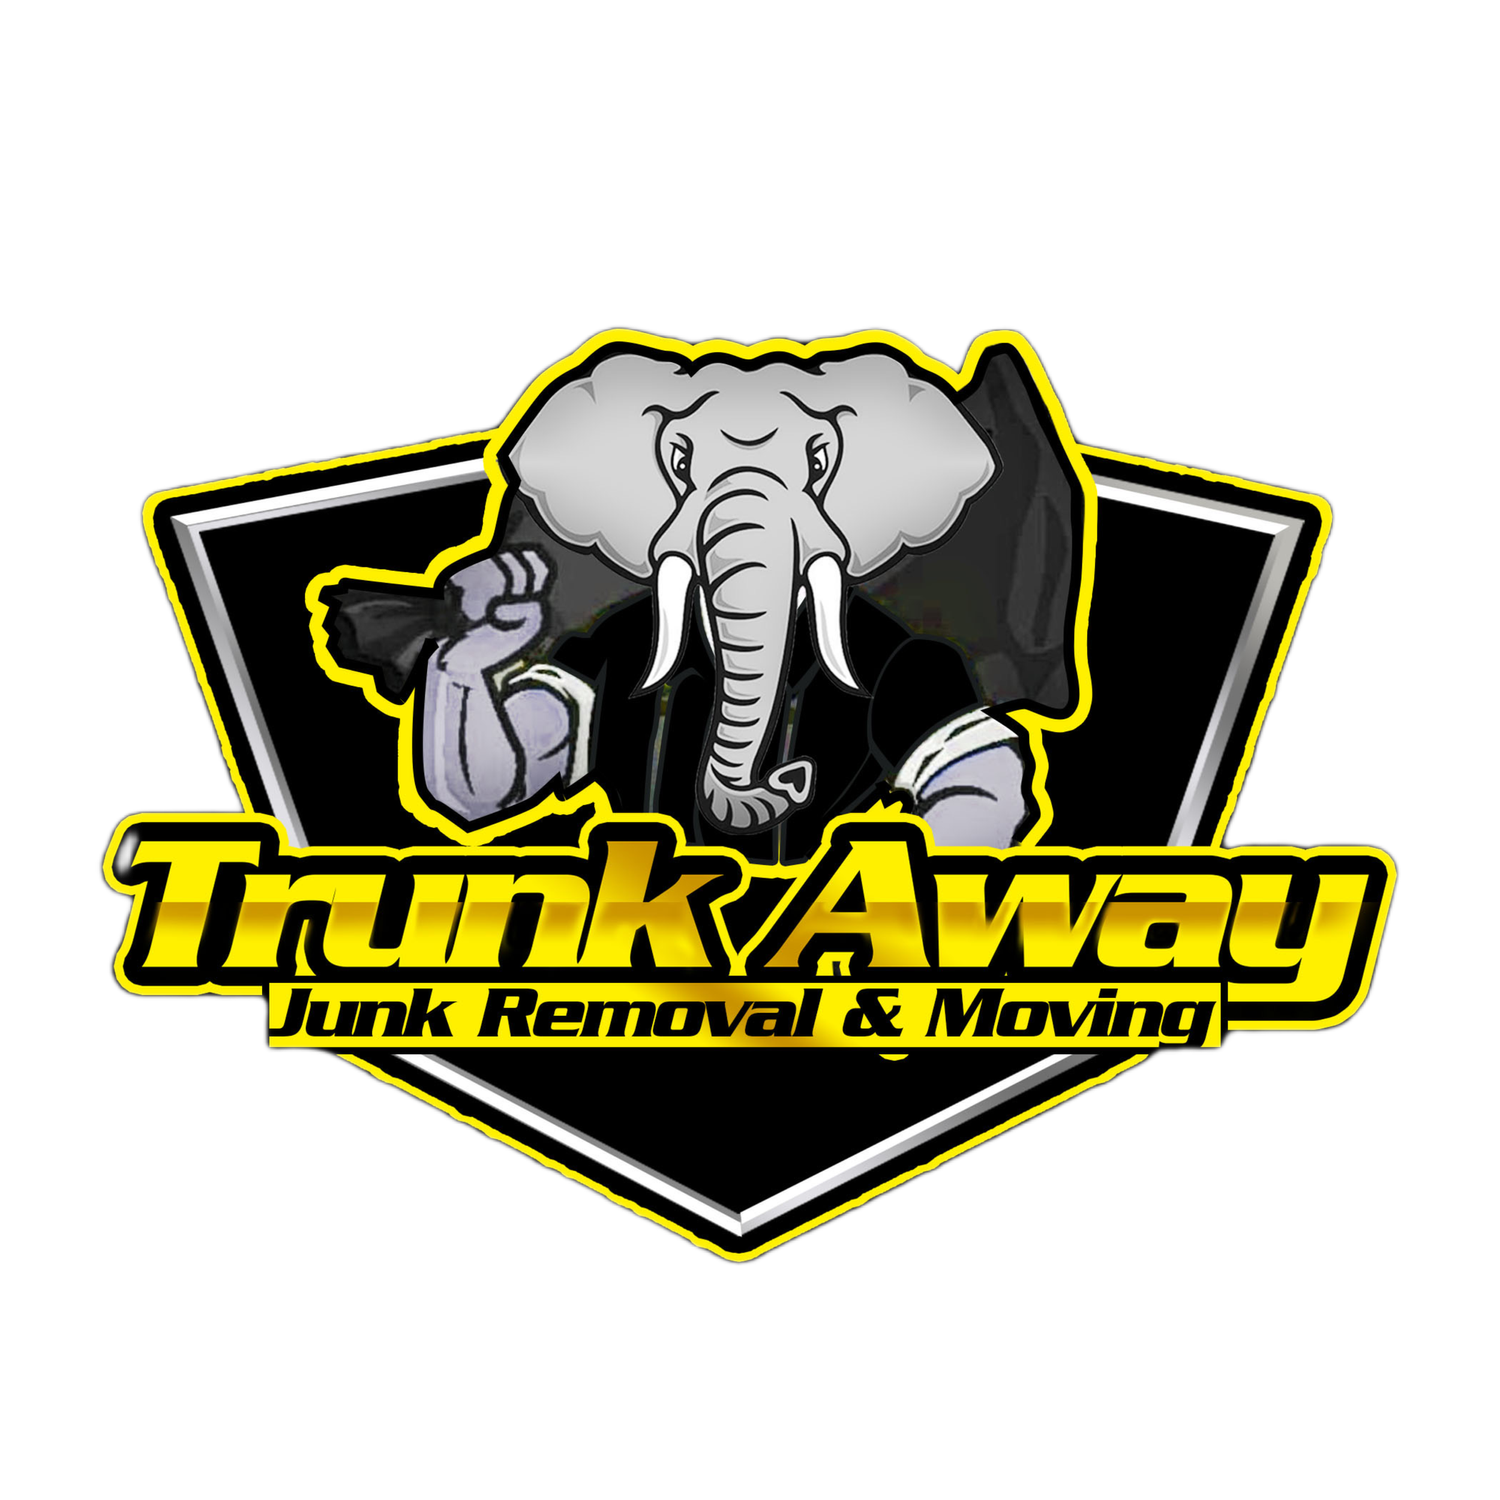 Trunk Away Junk Removal &amp; Moving